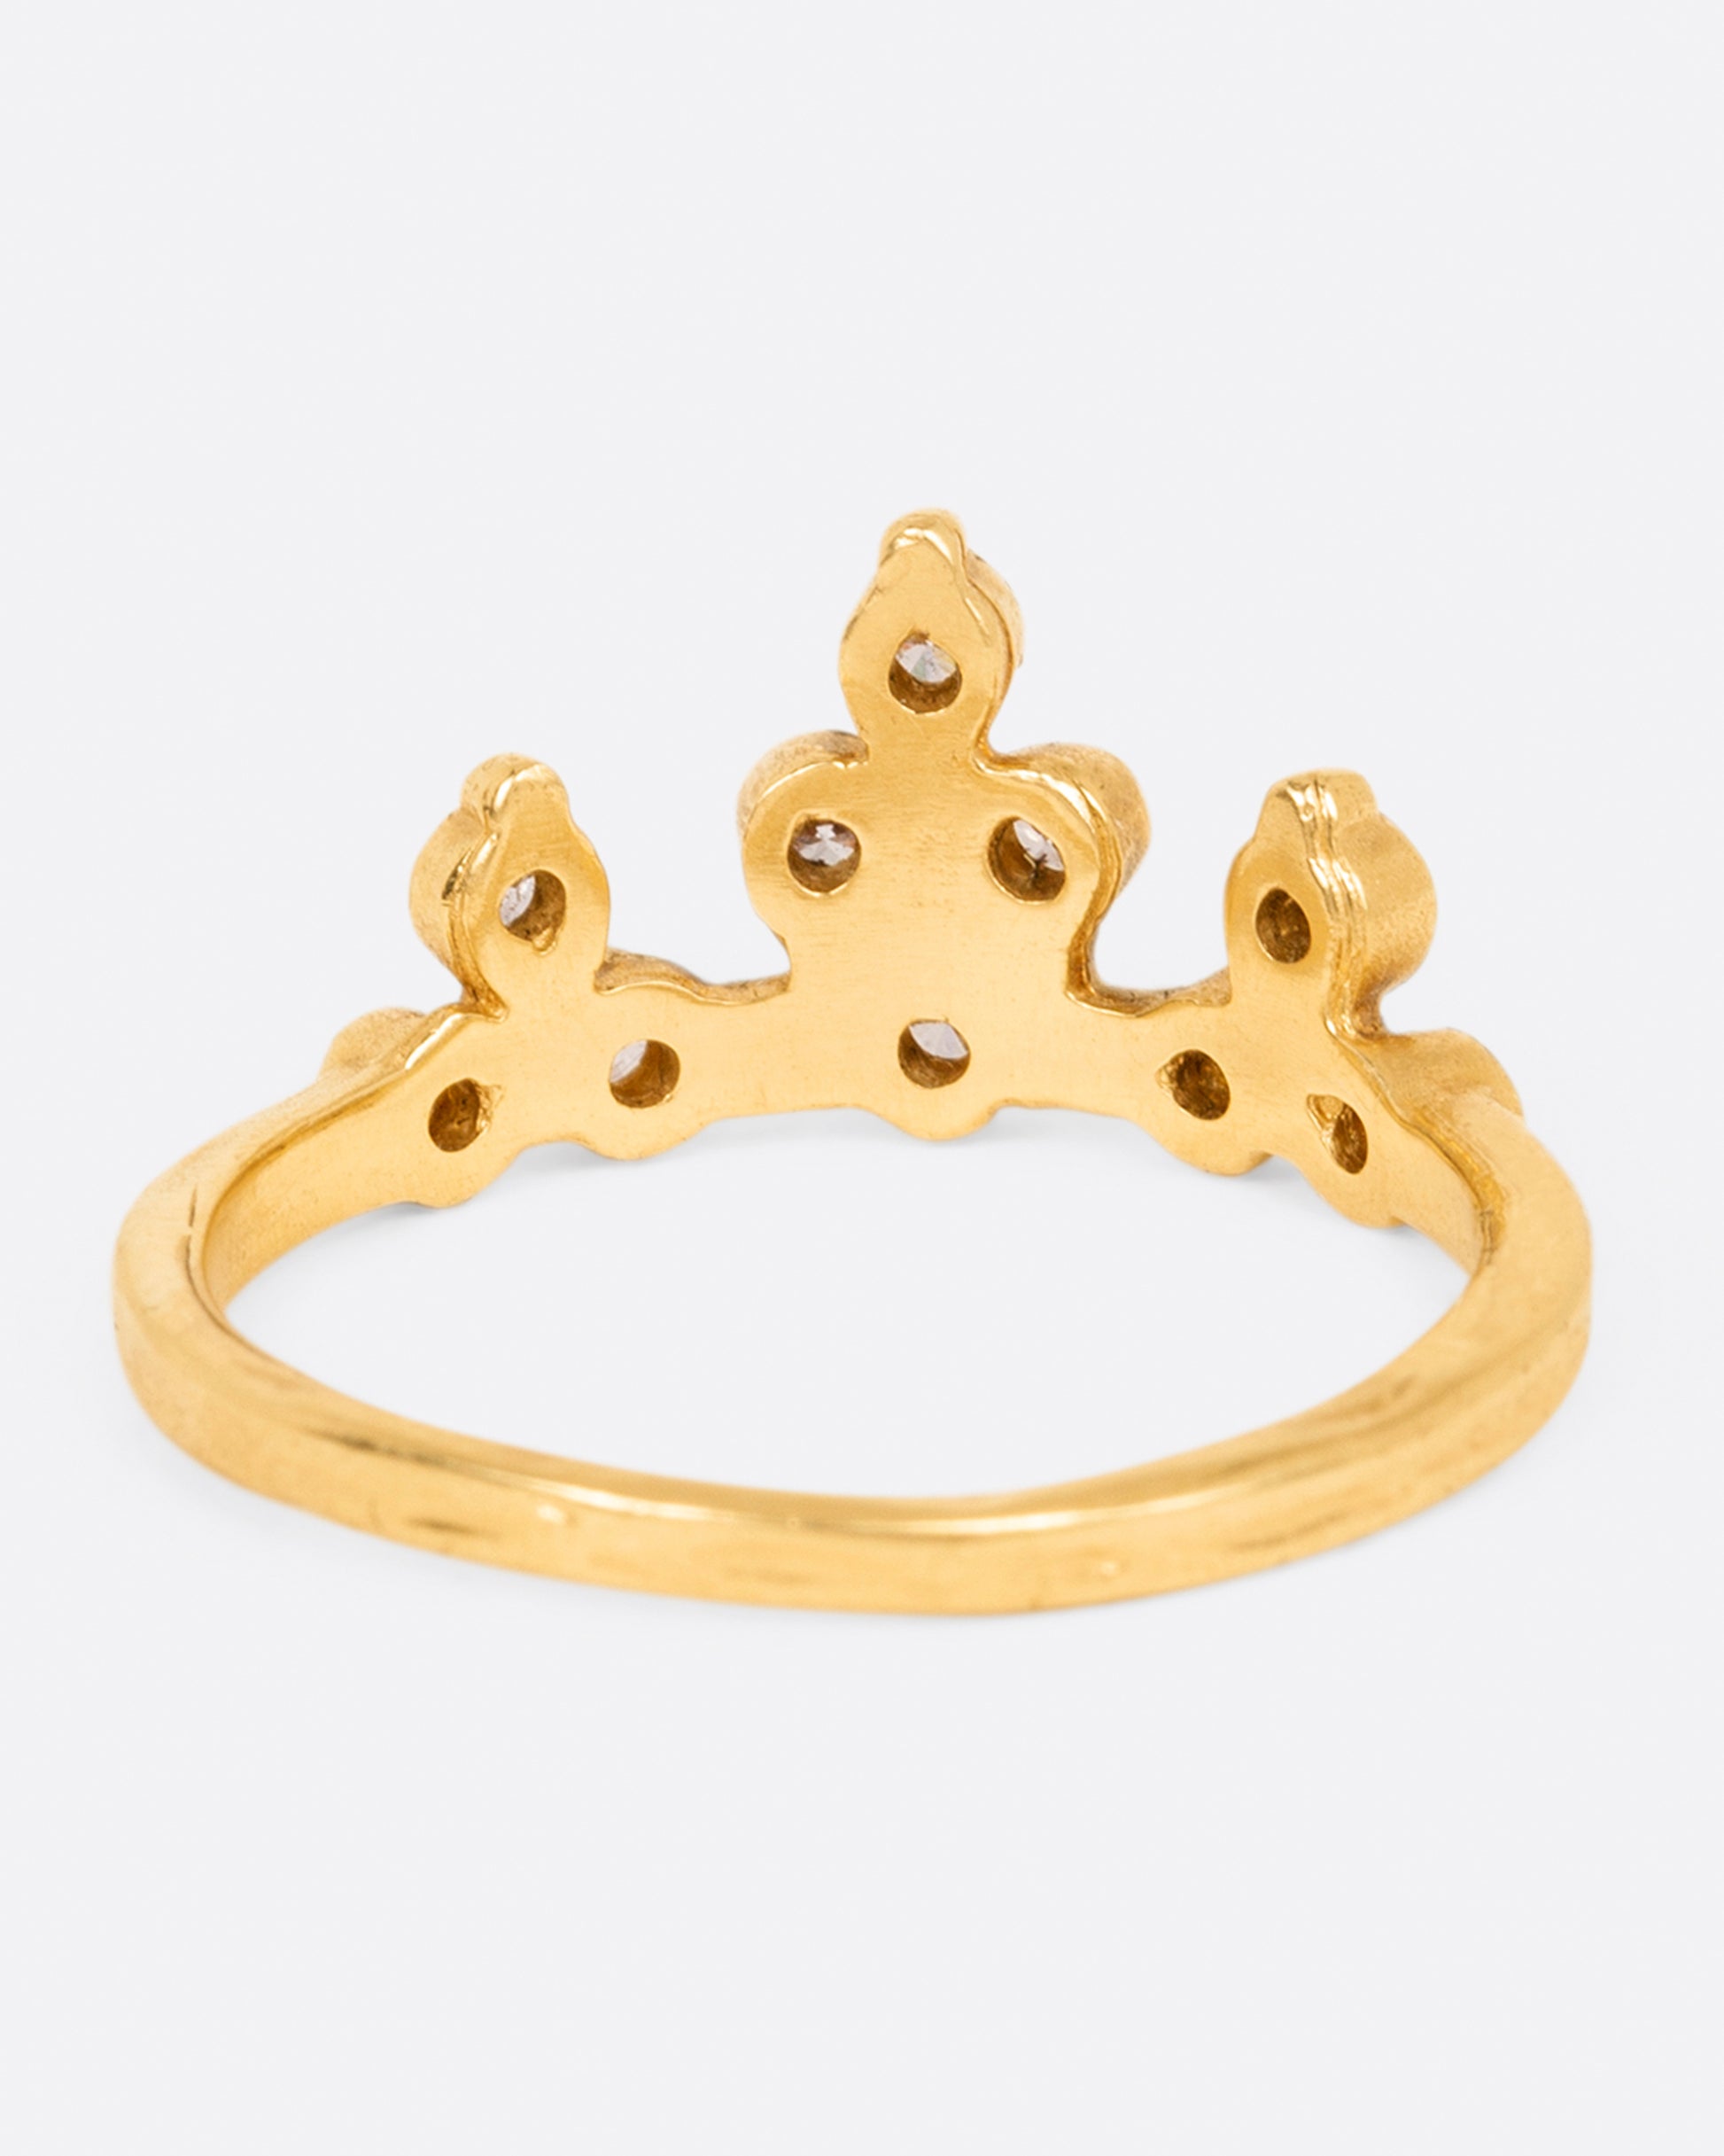 A yellow gold crown ring with round white diamonds, shown from the back.